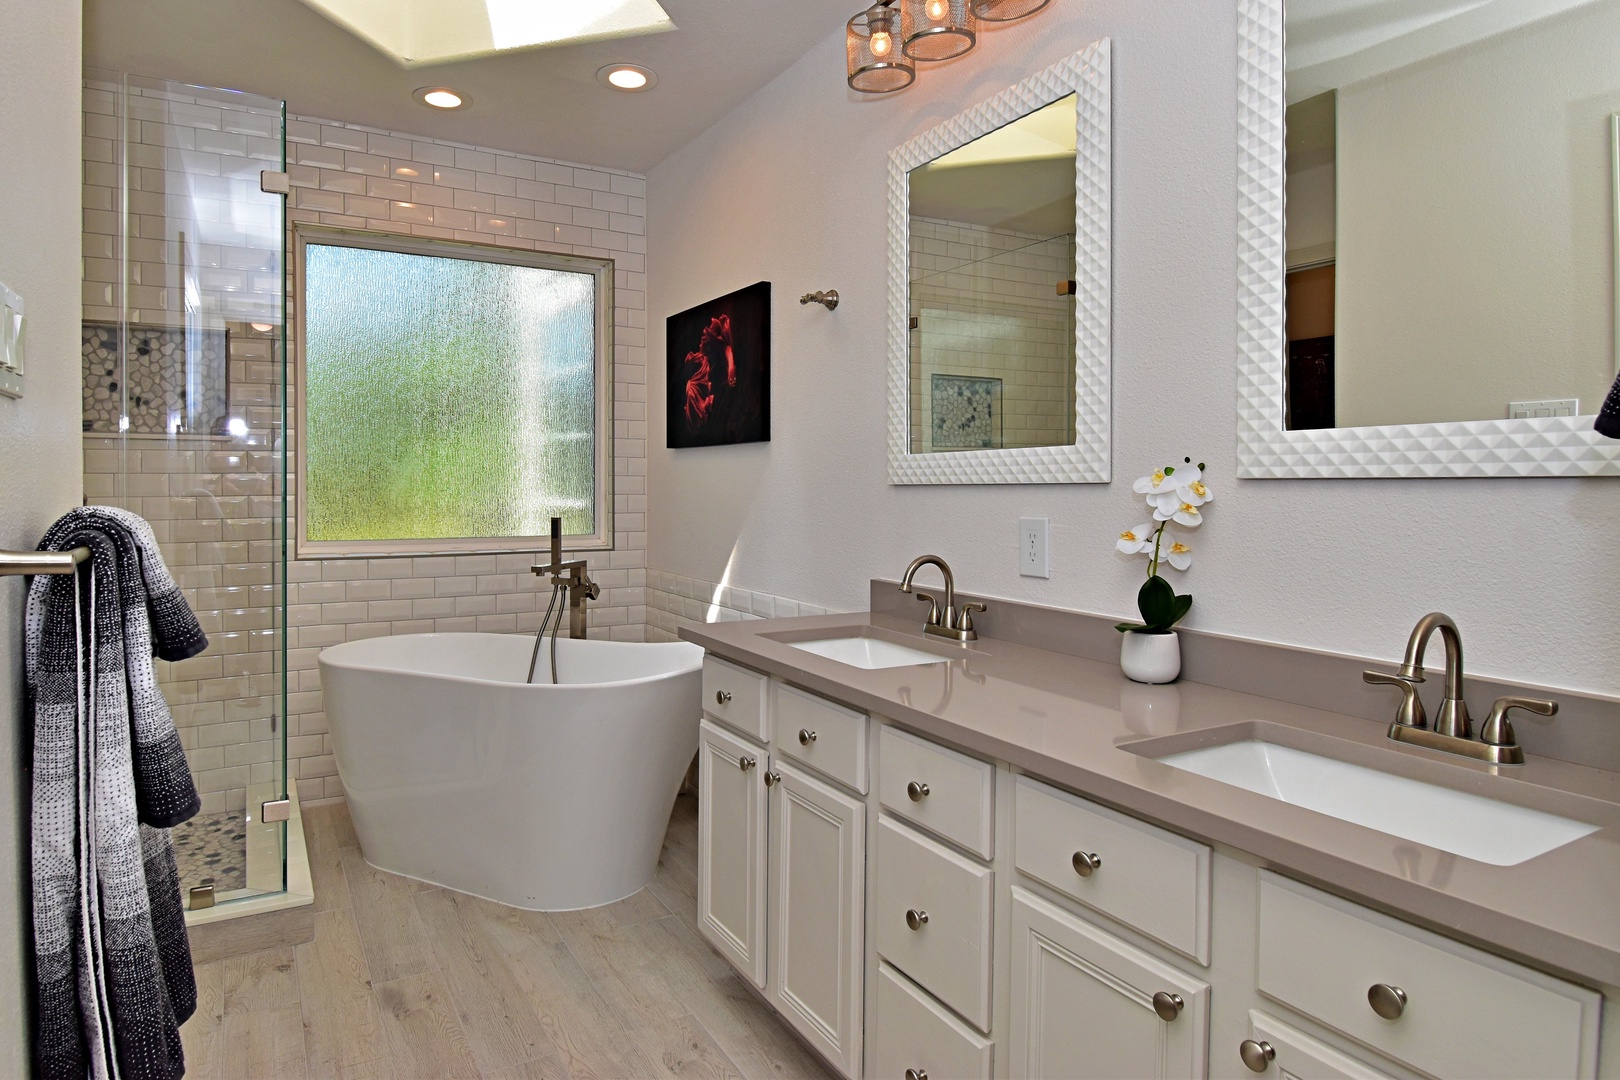 Master en-suite features a soaking tub and dual sinks